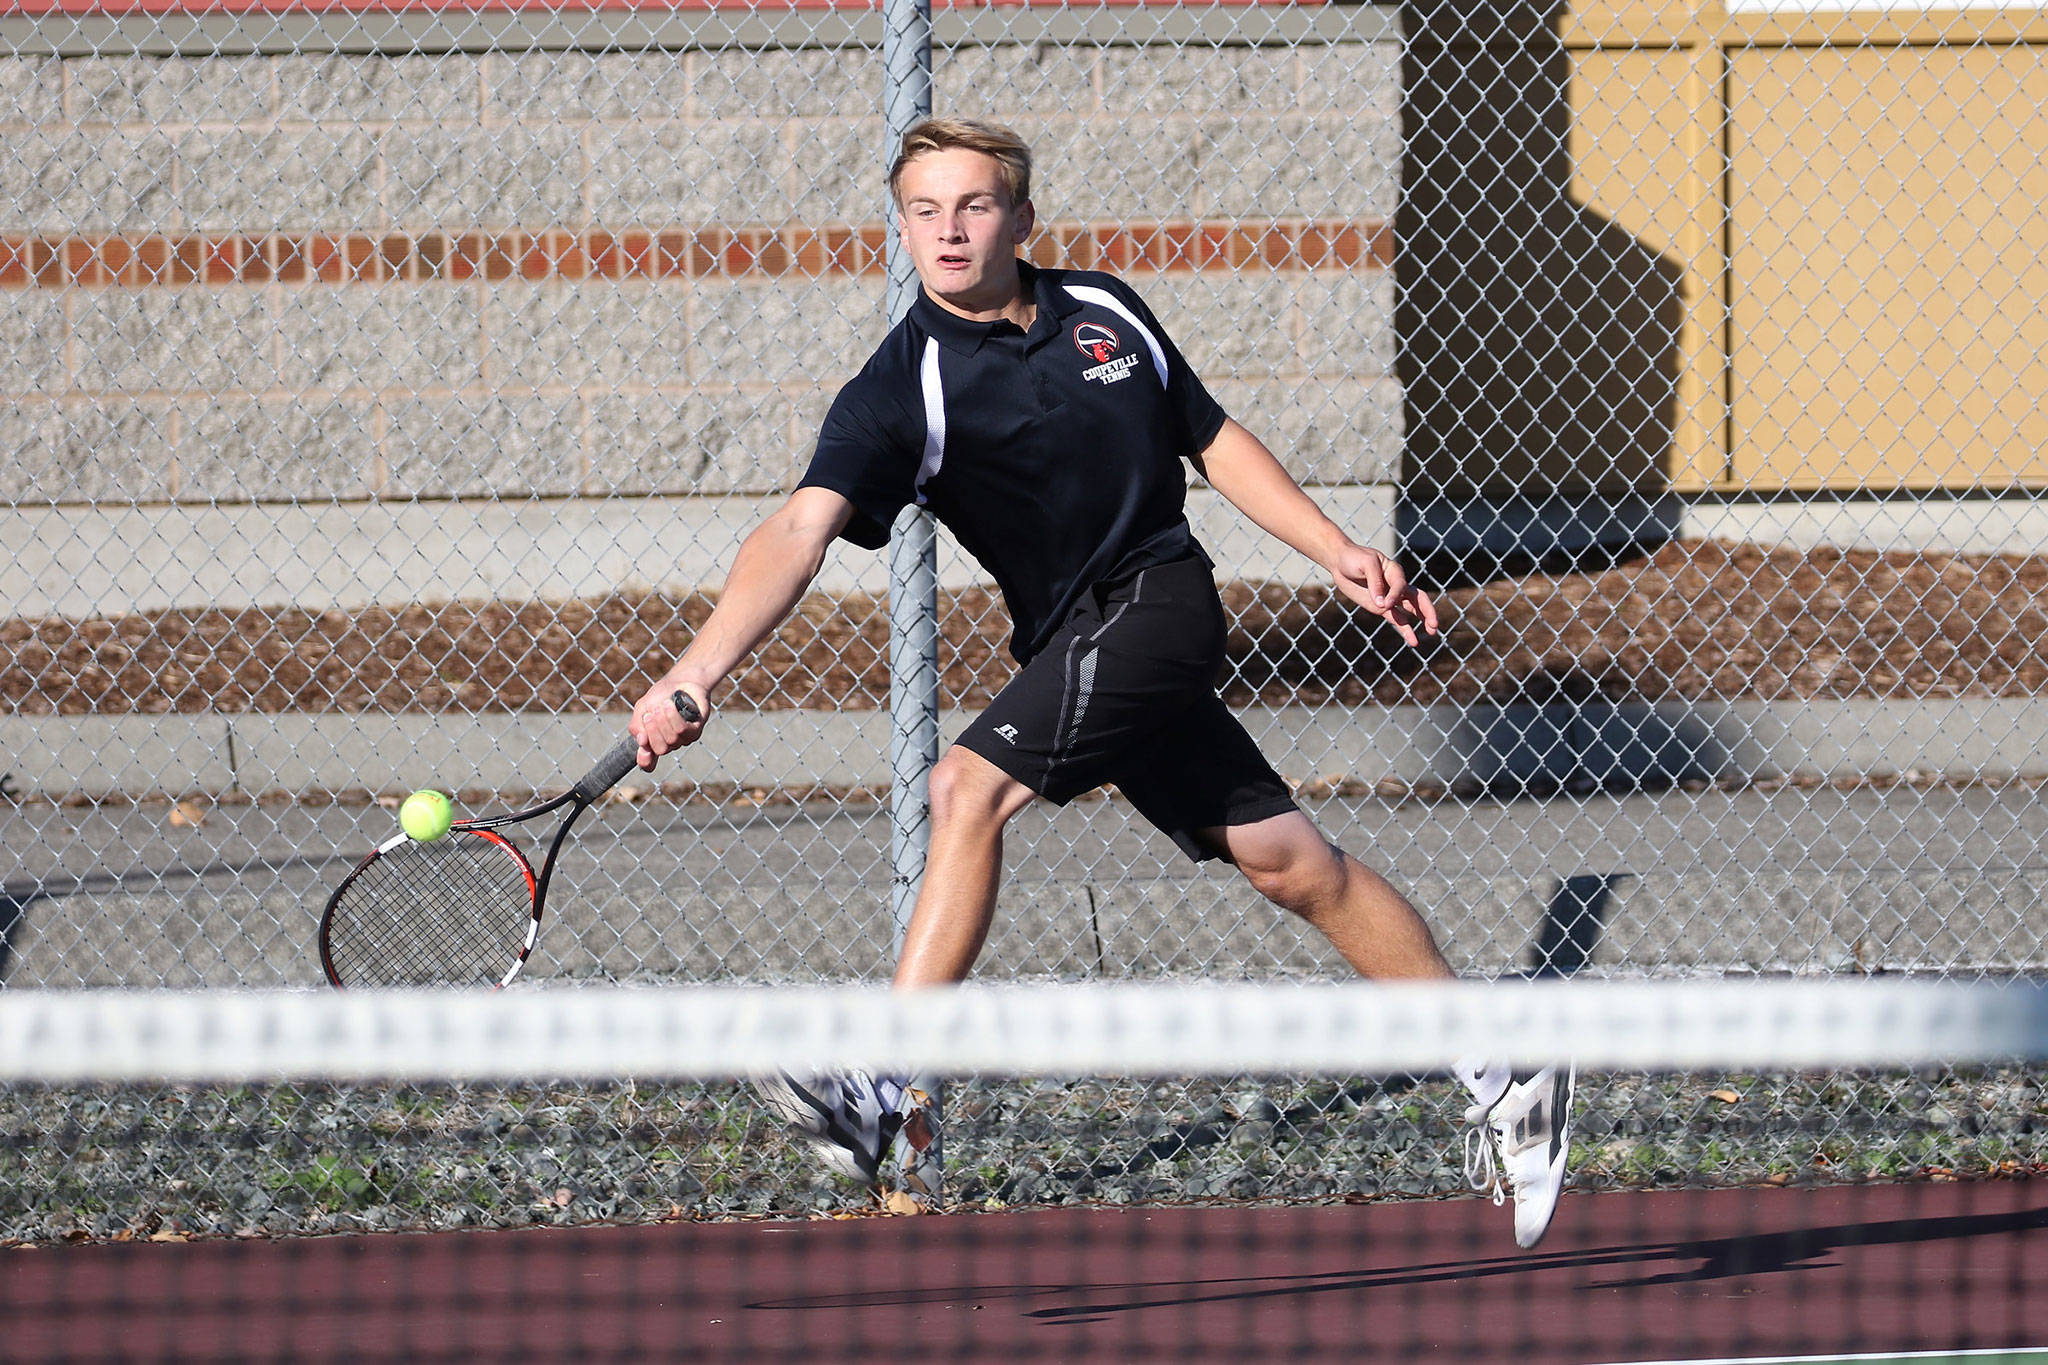 Coupeville’s Drake Borden returns a shot in his first singles with Wednesday. (Photo by John Fisken)